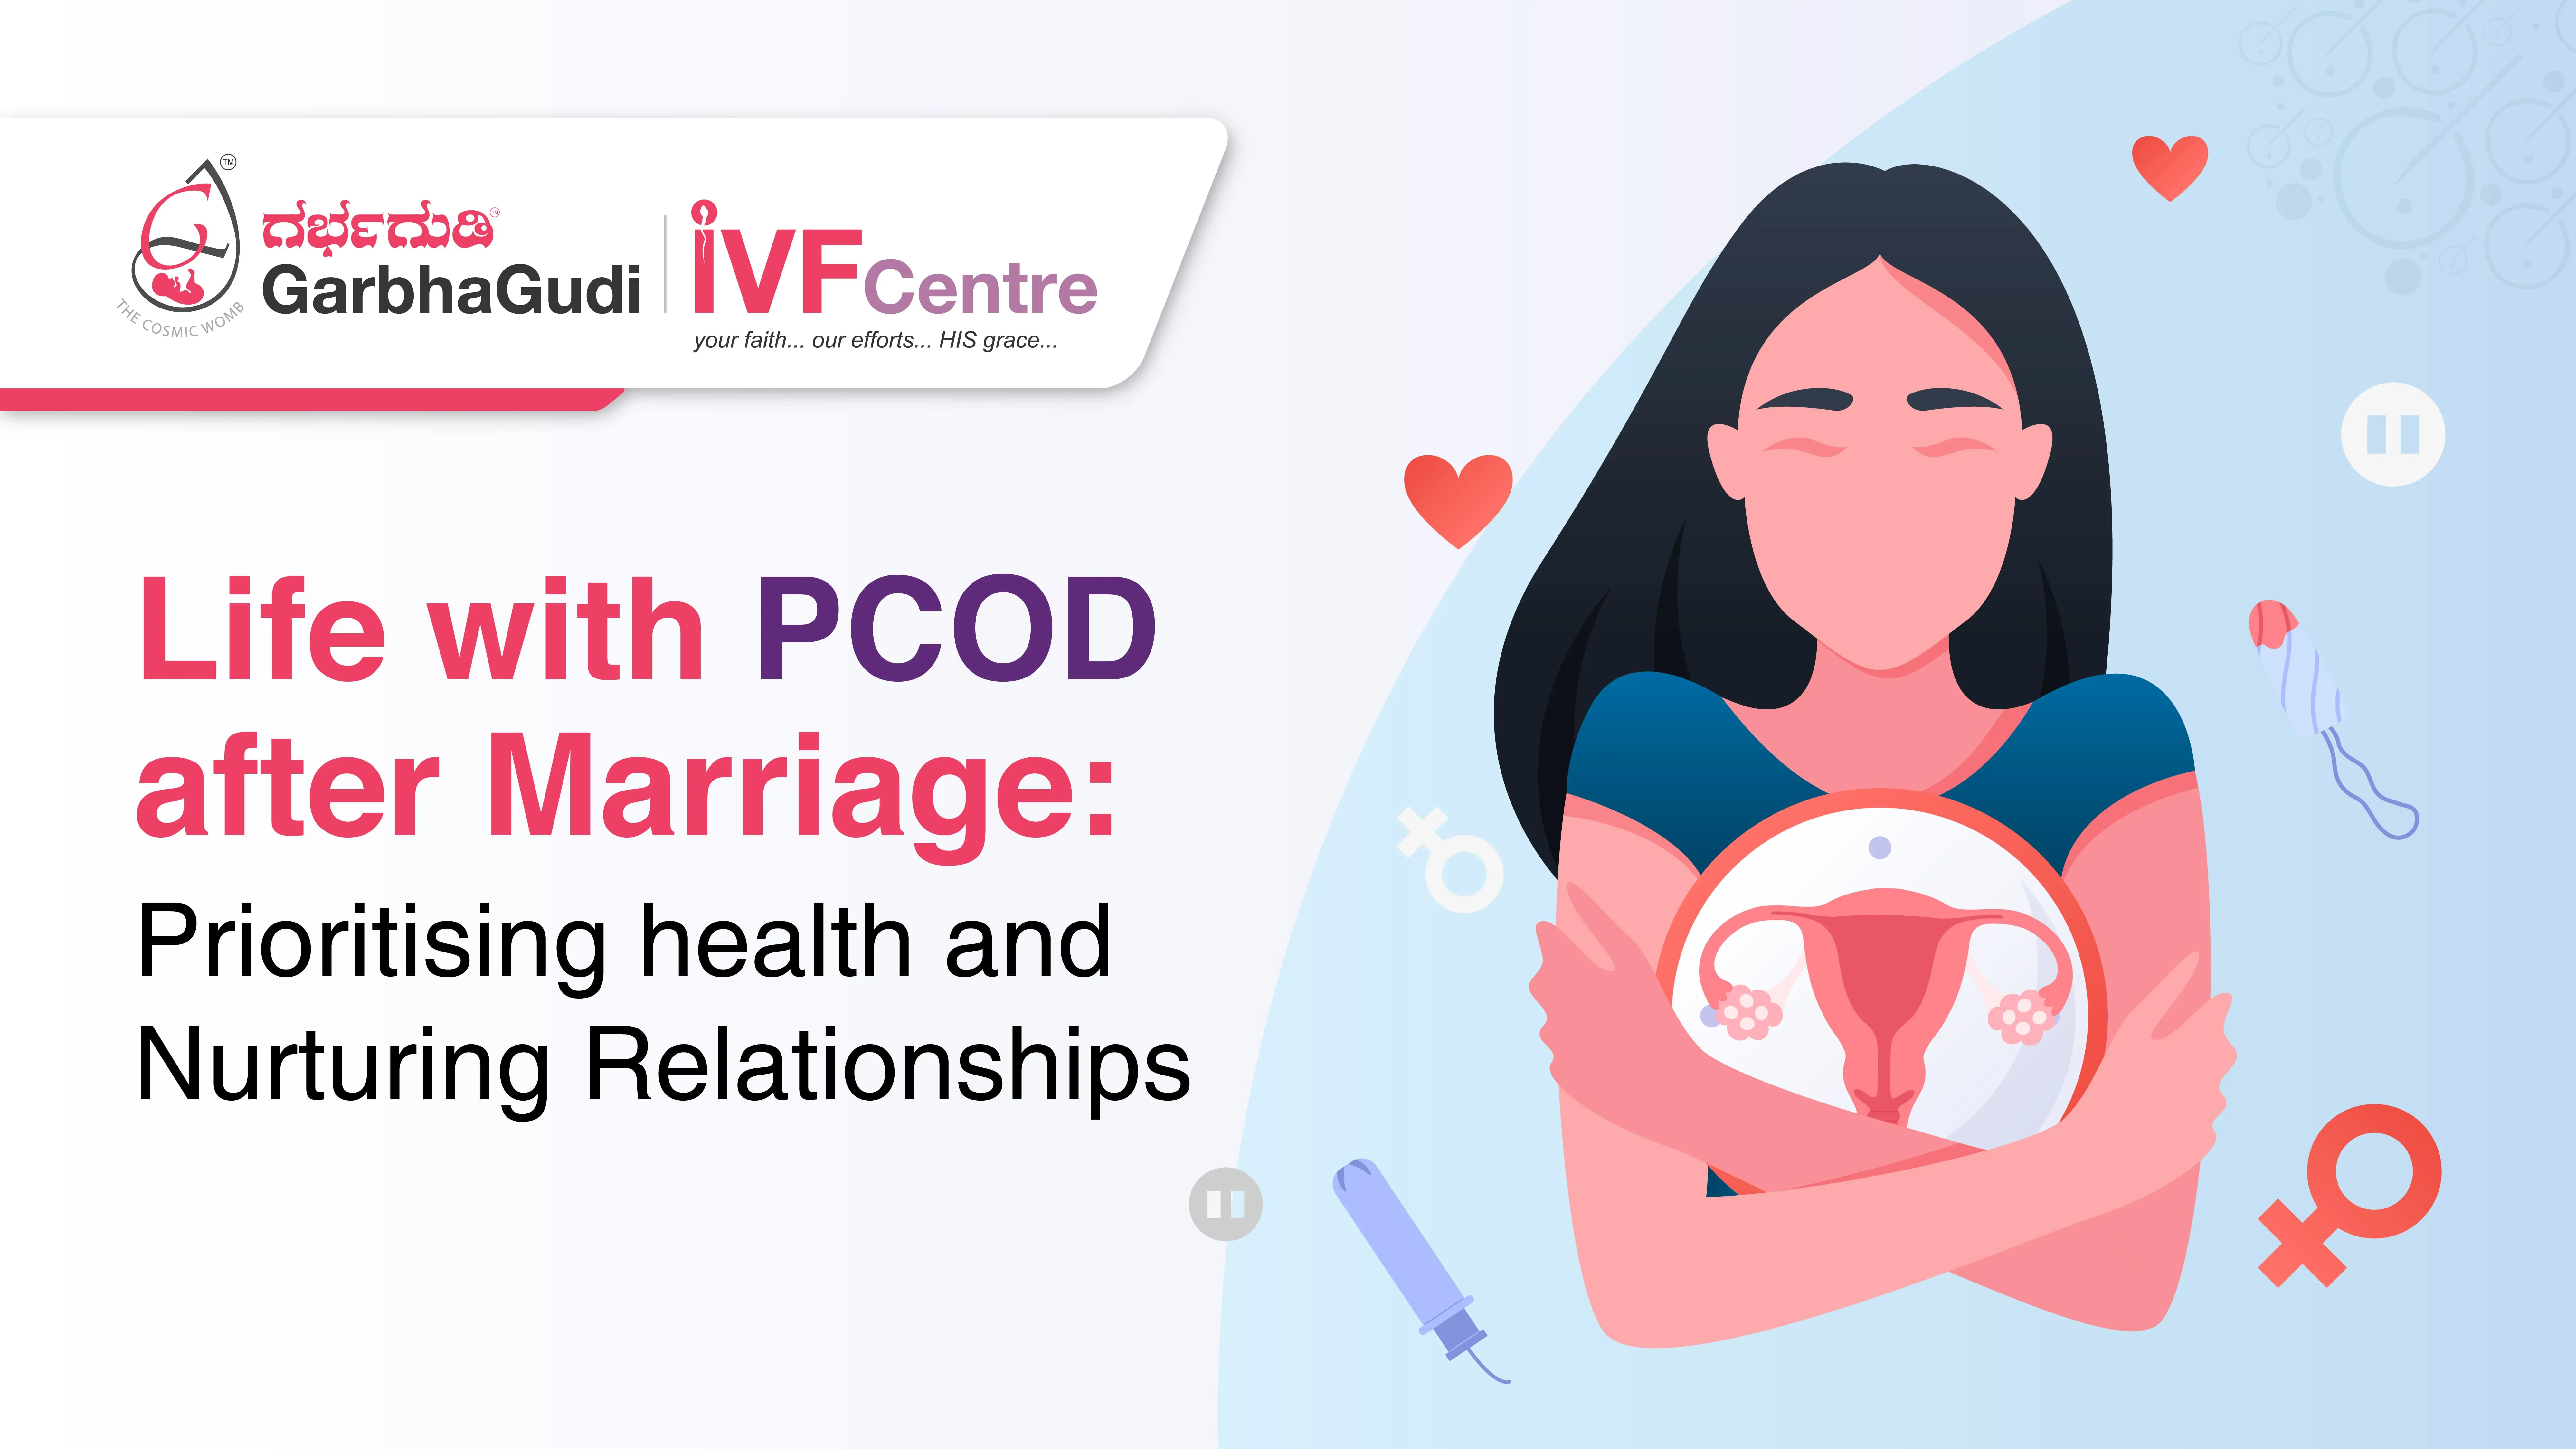 Life with PCOD after marriage: Prioritising health and Nurturing Relationships